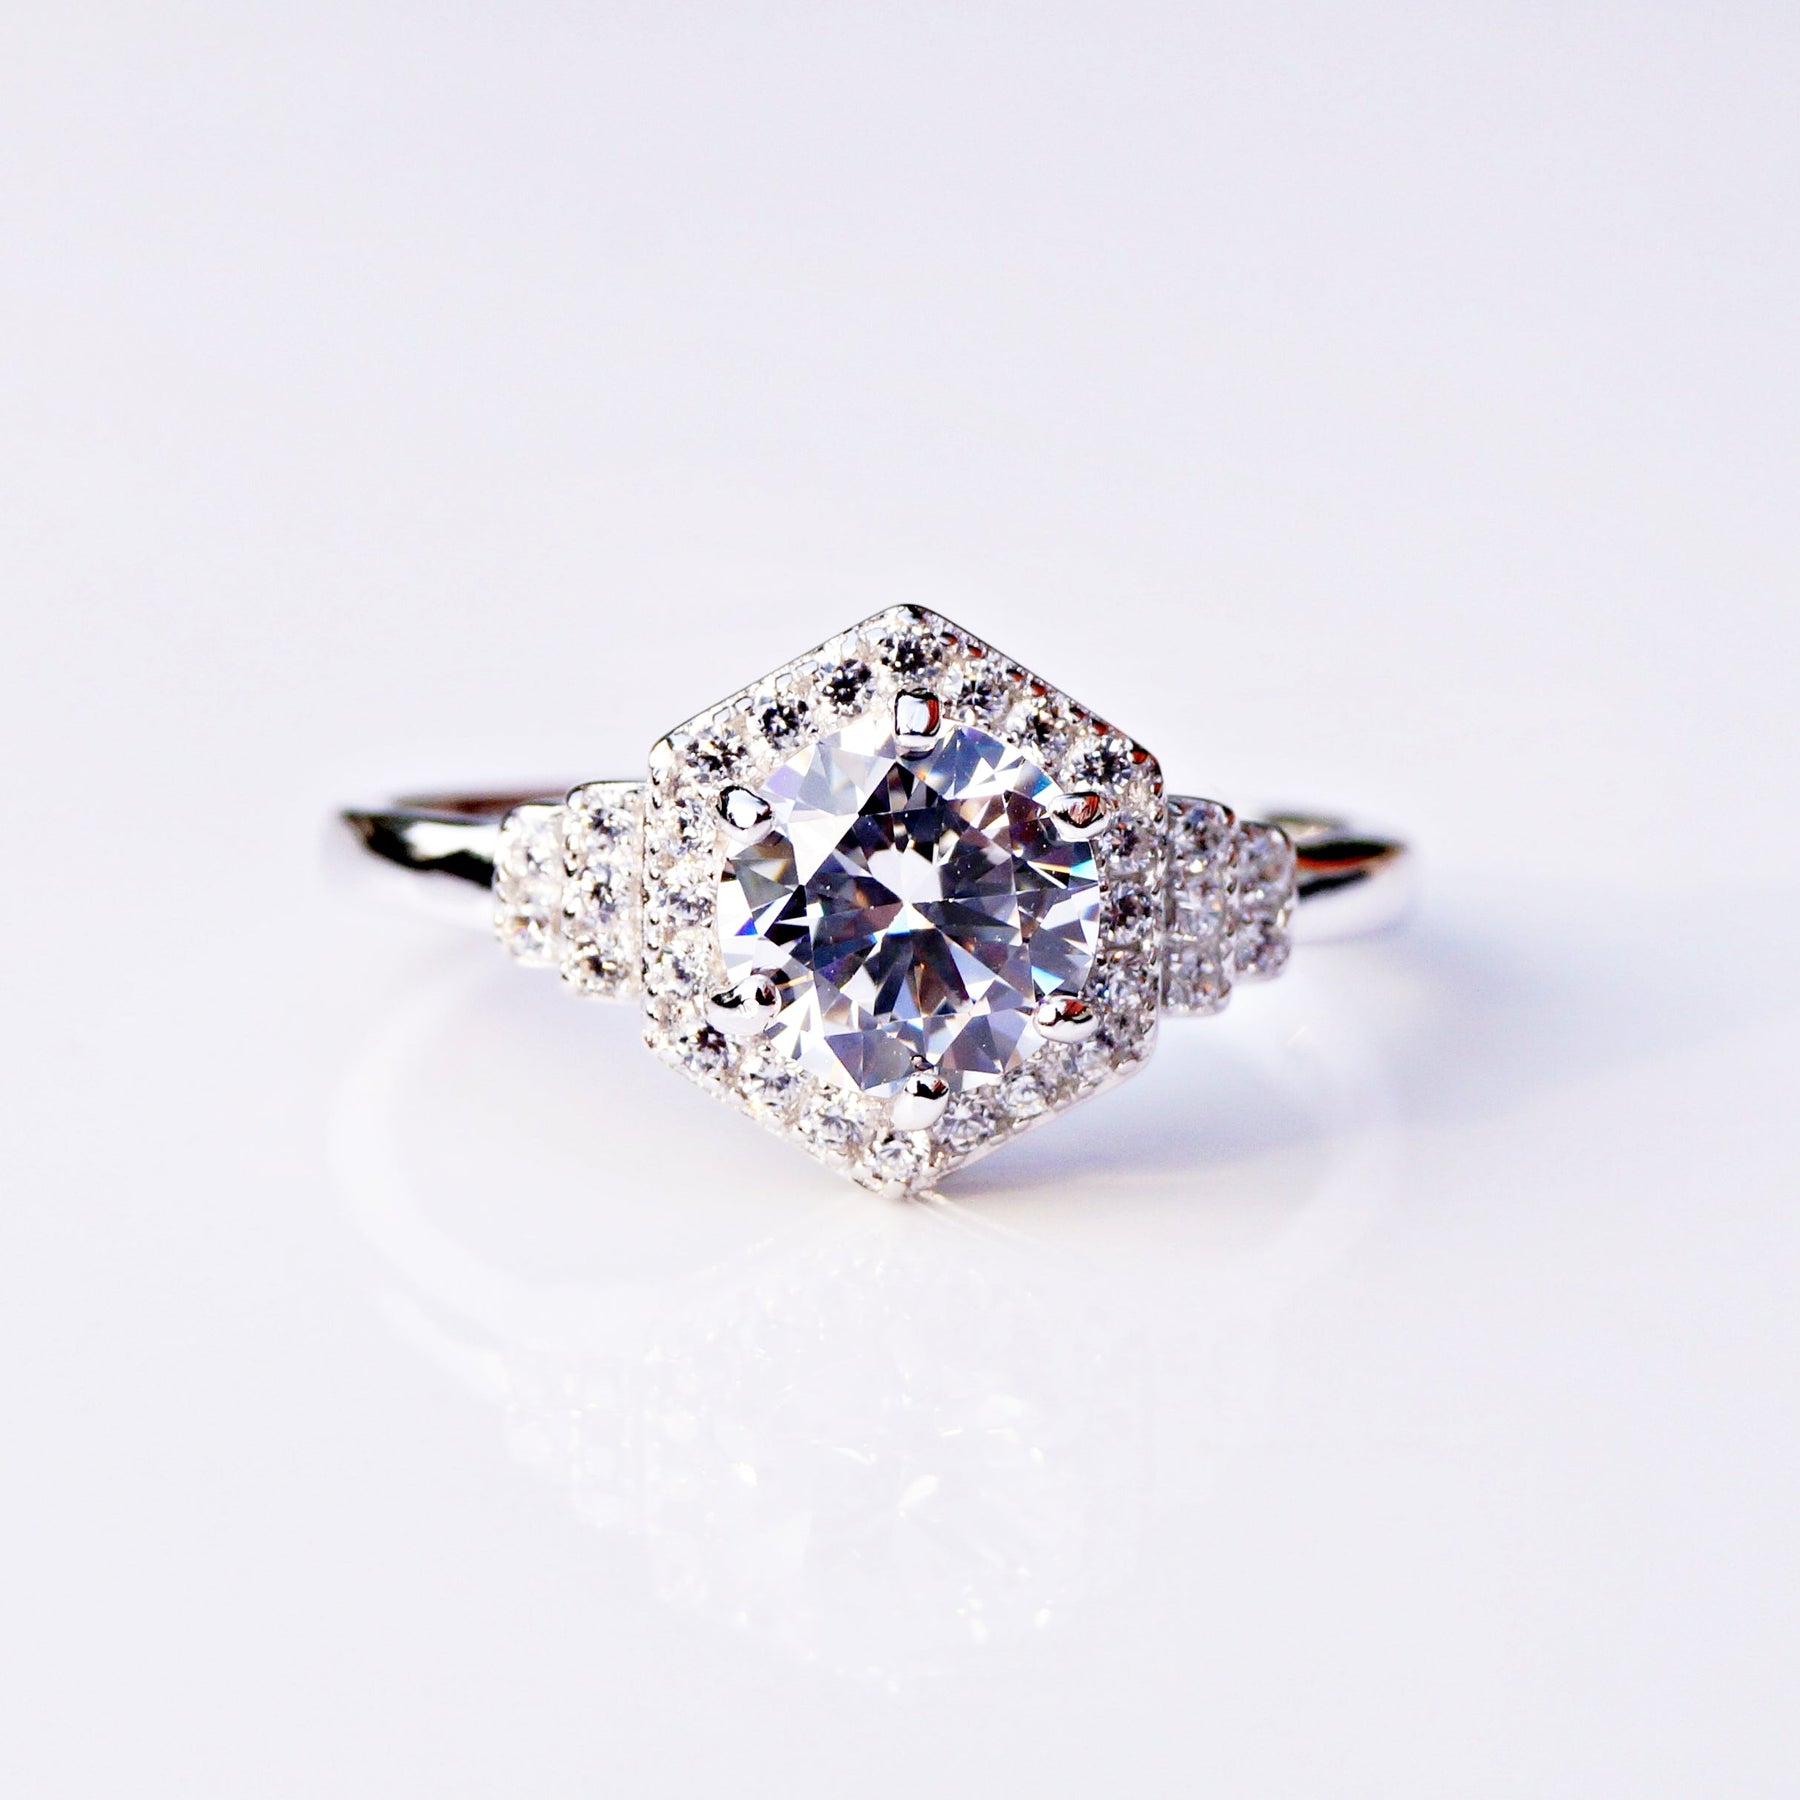 The Hexagon Solitaire Ring